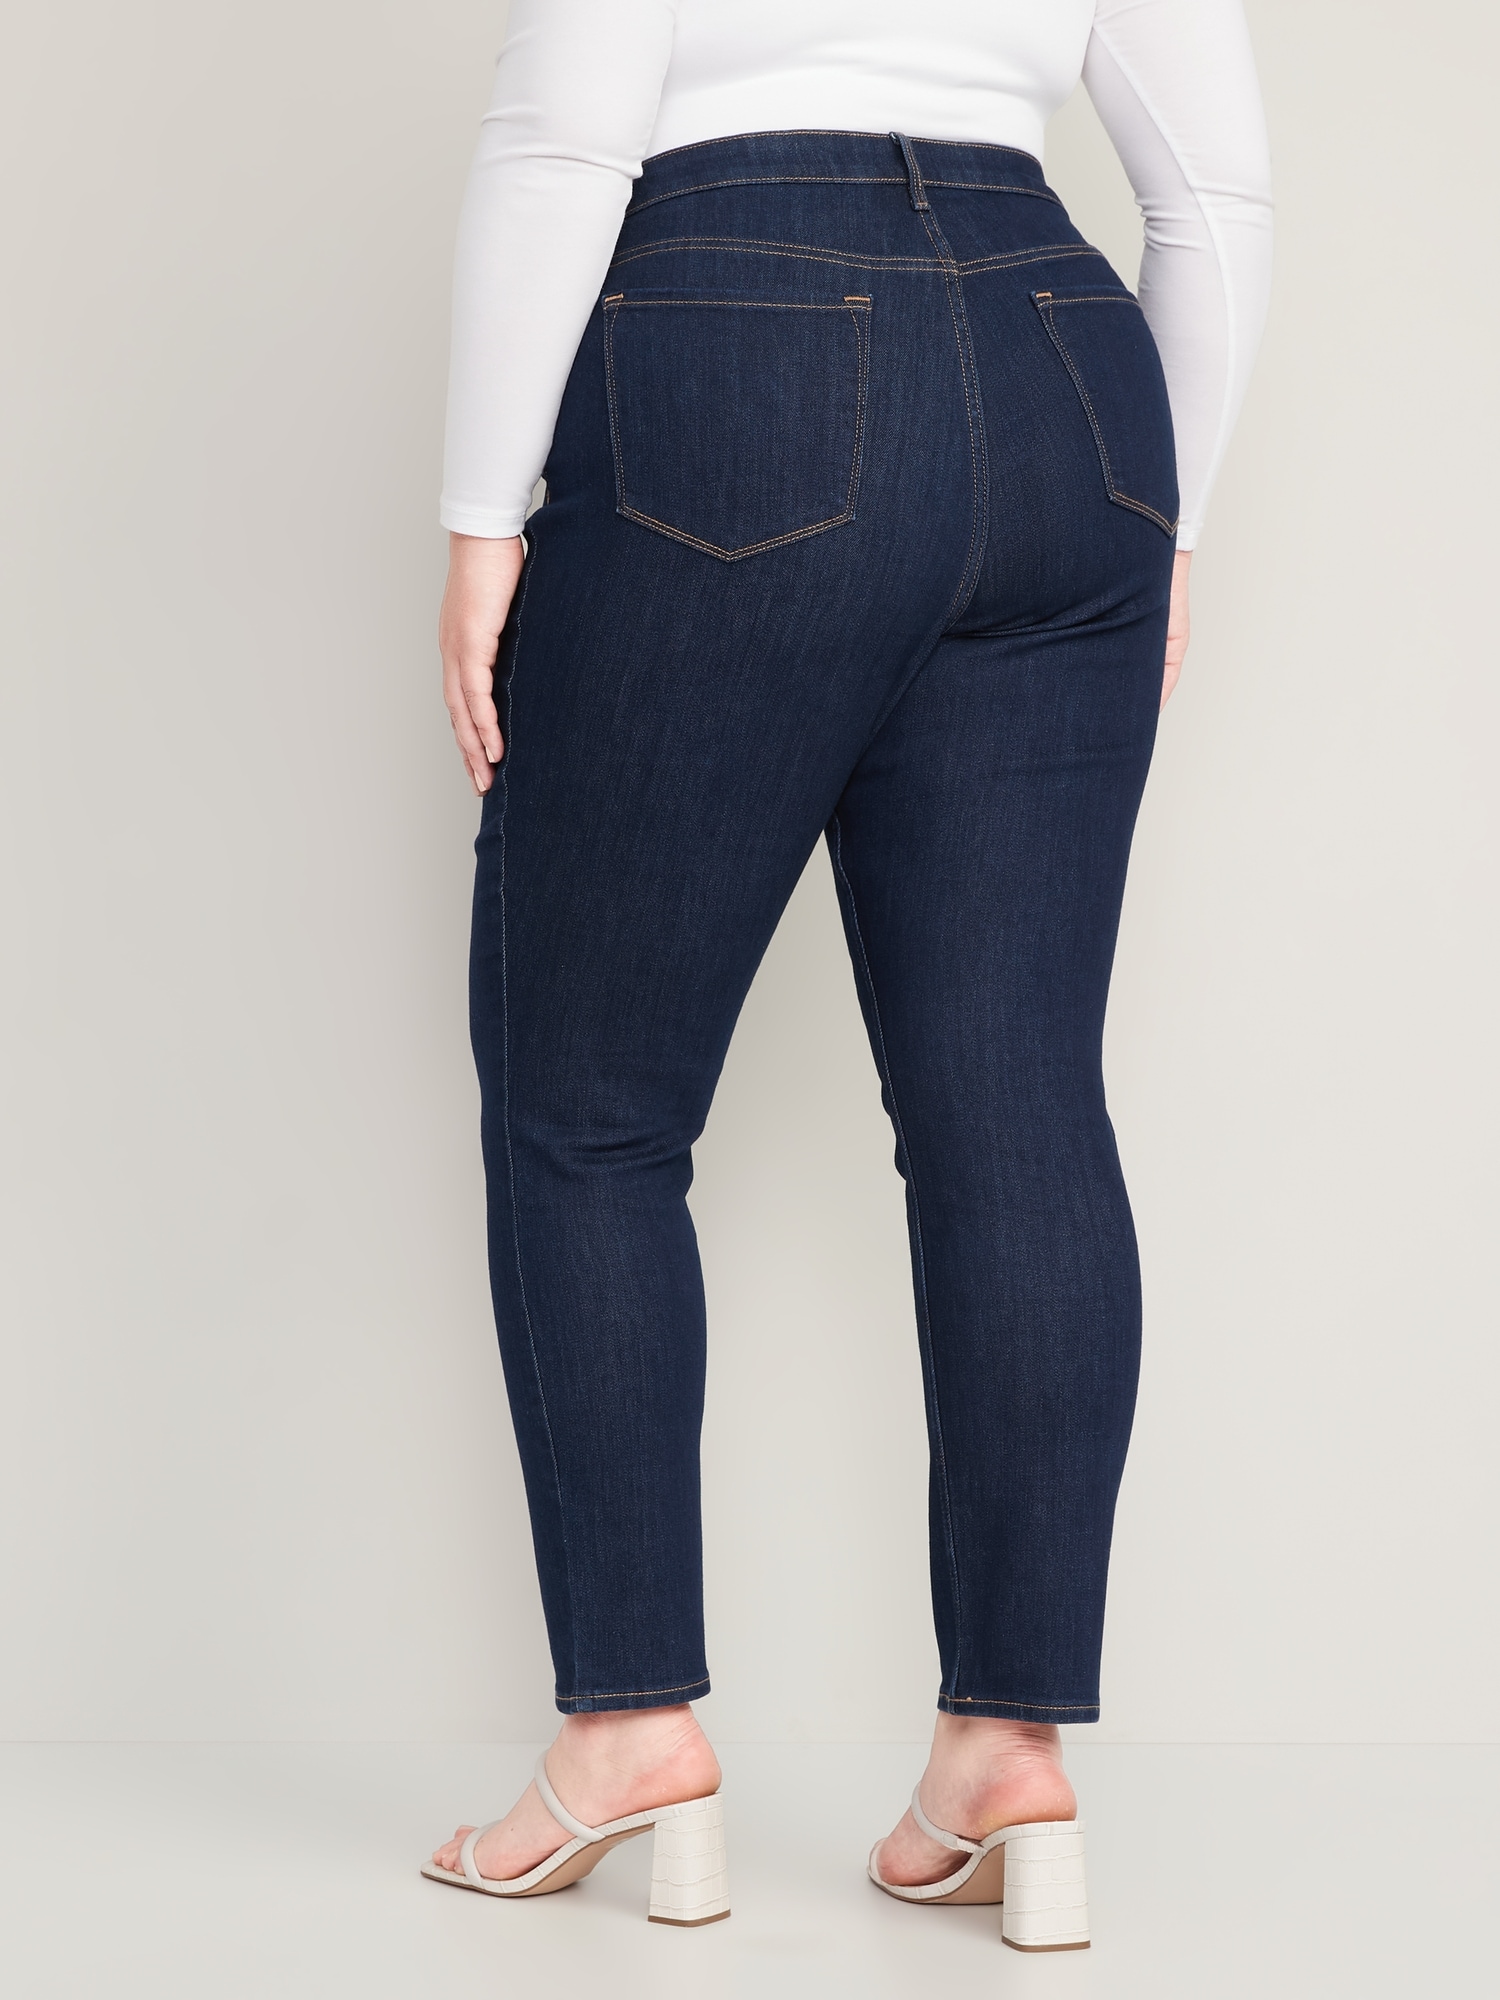 Best High-Waisted Jeans From Old Navy 2021 | POPSUGAR Fashion UK